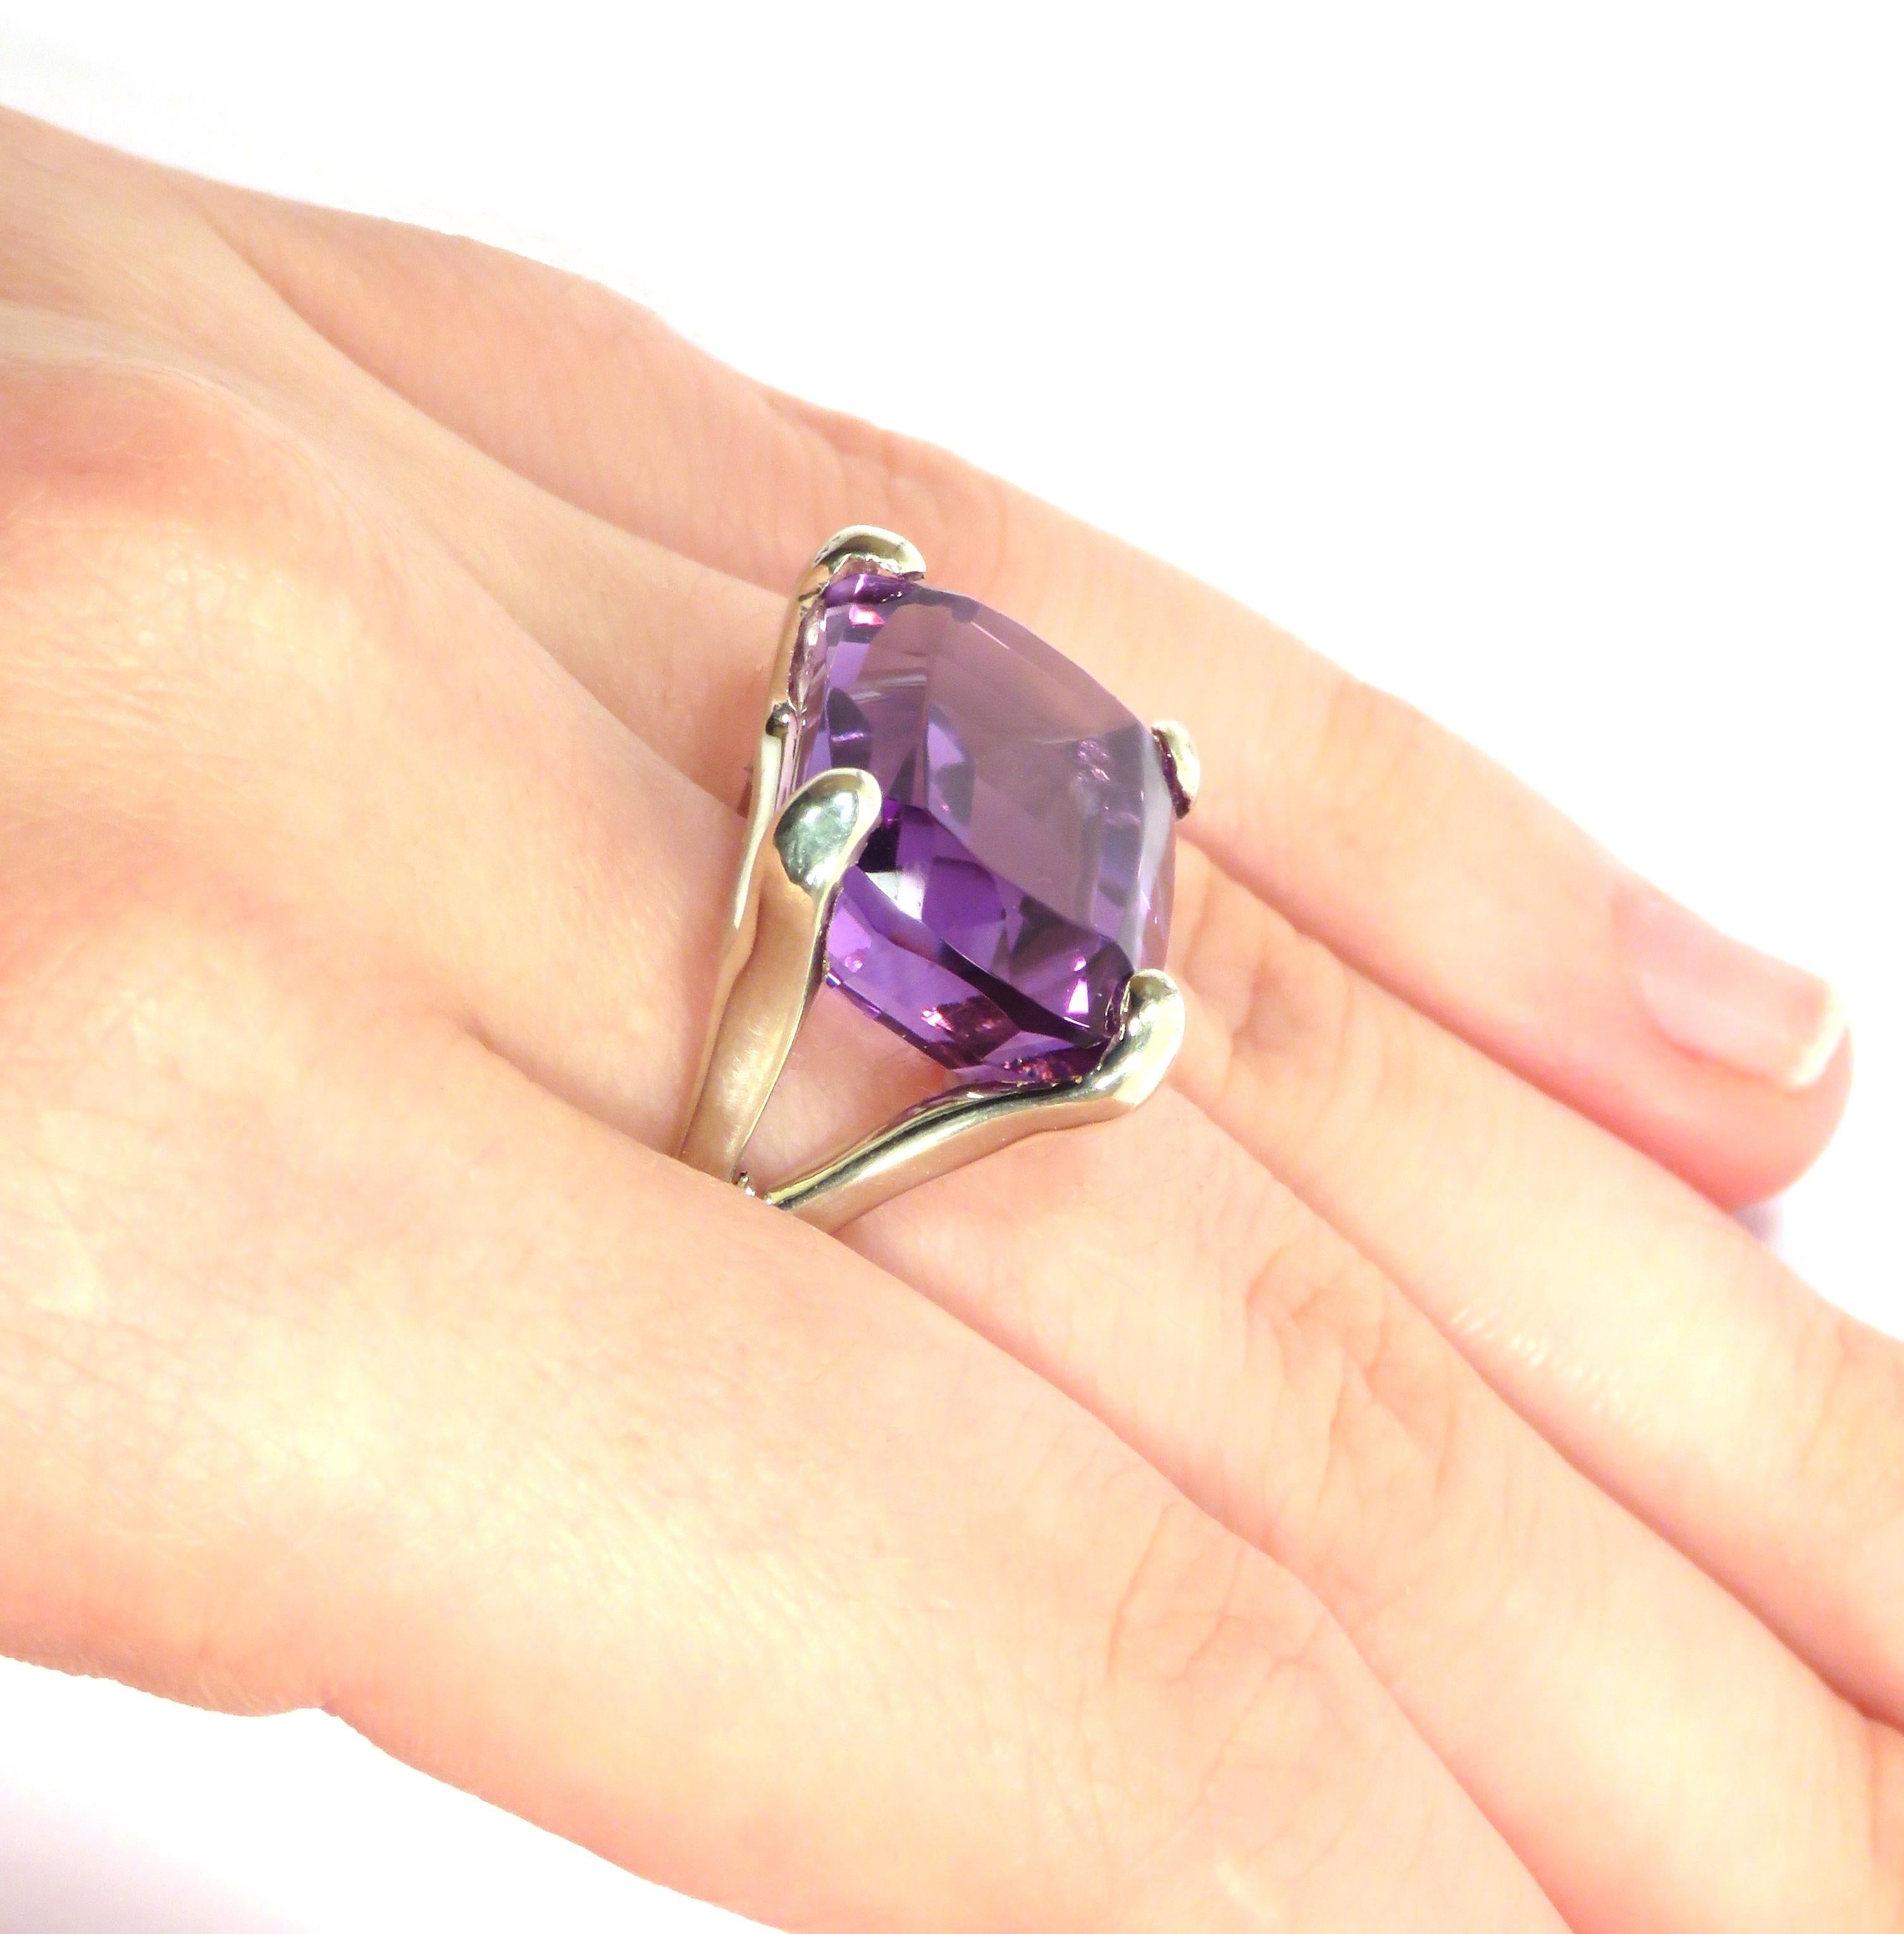 Cocktail ring in 9 karat white gold with a natural rectangle-cut amethyst. US finger size is 7 1/4, French size 55, Italian size 15, the ring can be resized to the customer's size before shipment. It is marked with the Italian Gold Mark 375 and